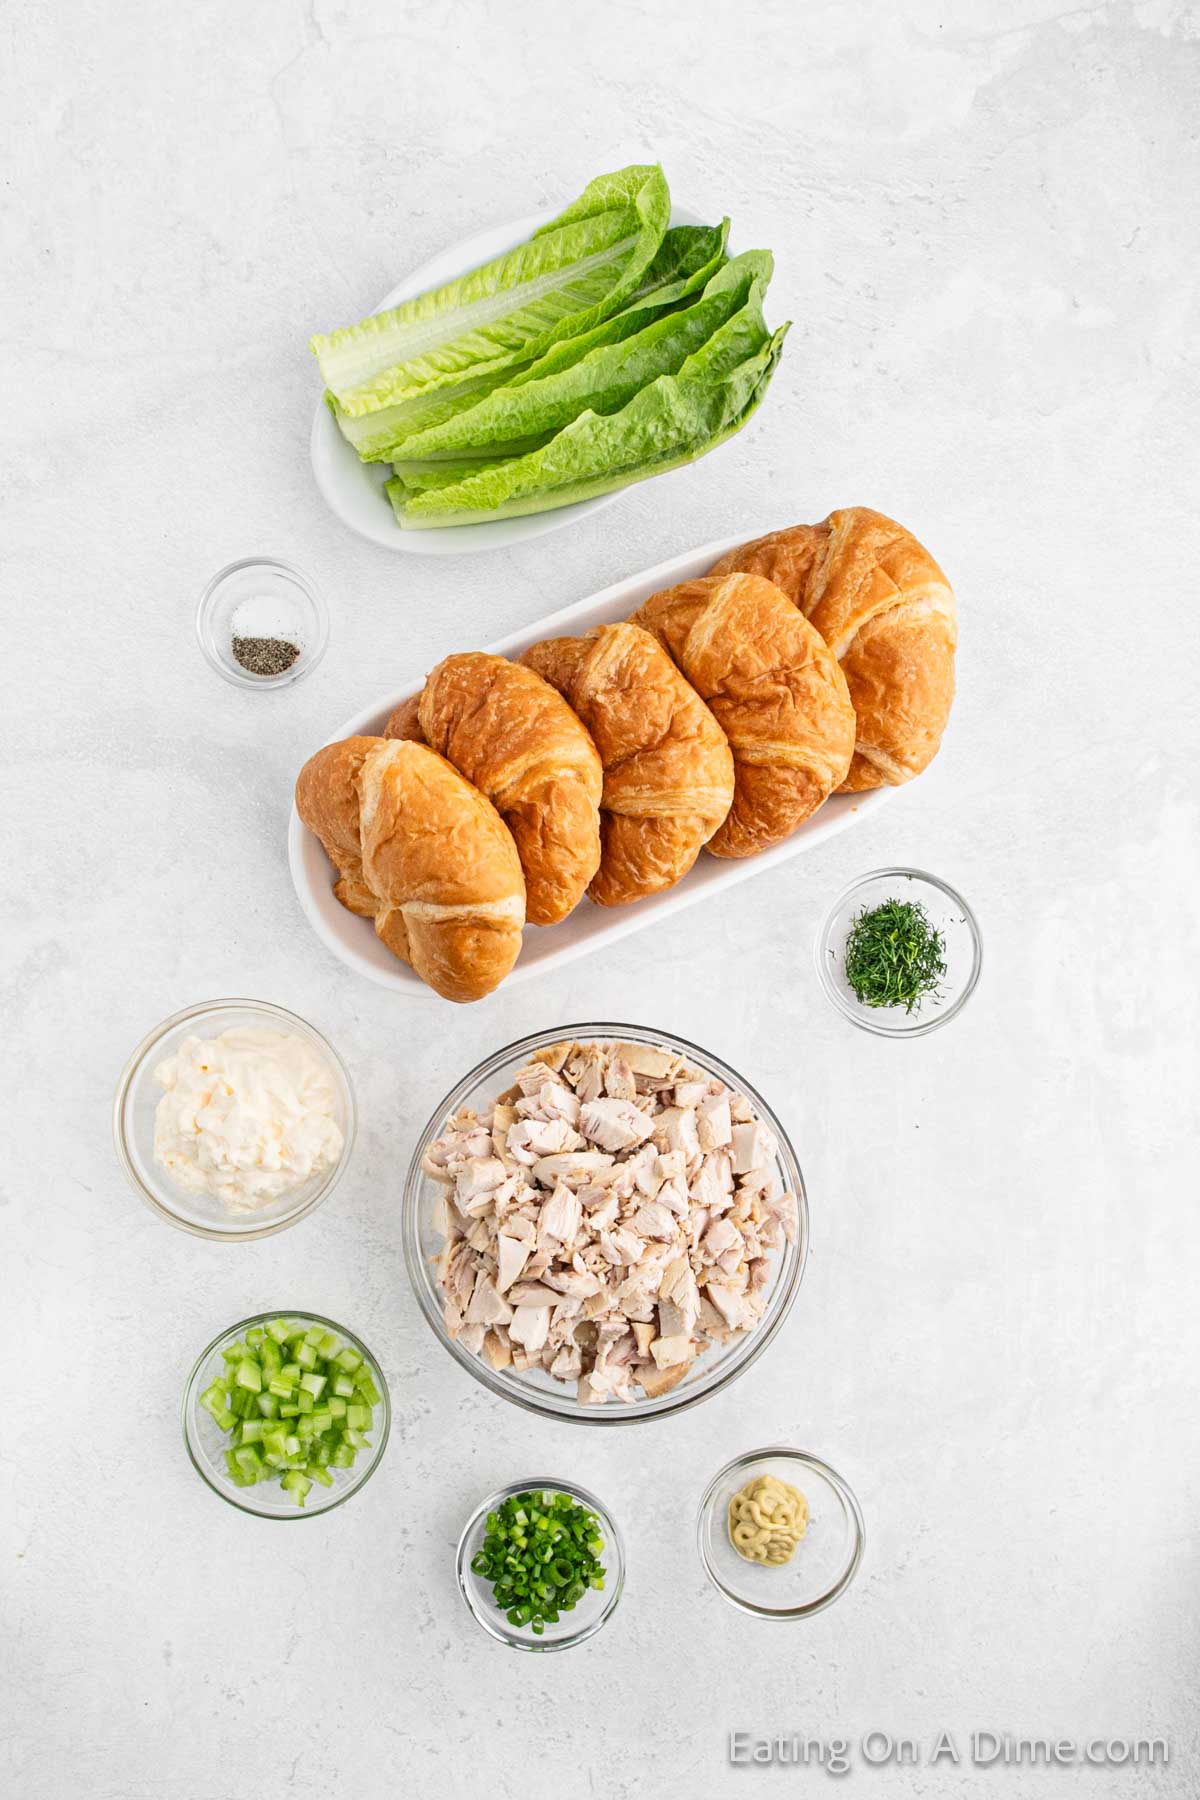 Ingredients for making the best chicken salad recipe croissant sandwiches are laid out on a light surface. Items include chopped chicken, croissants, leafy greens, diced celery, chopped green onions, mayonnaise, mustard, dill, and black pepper.